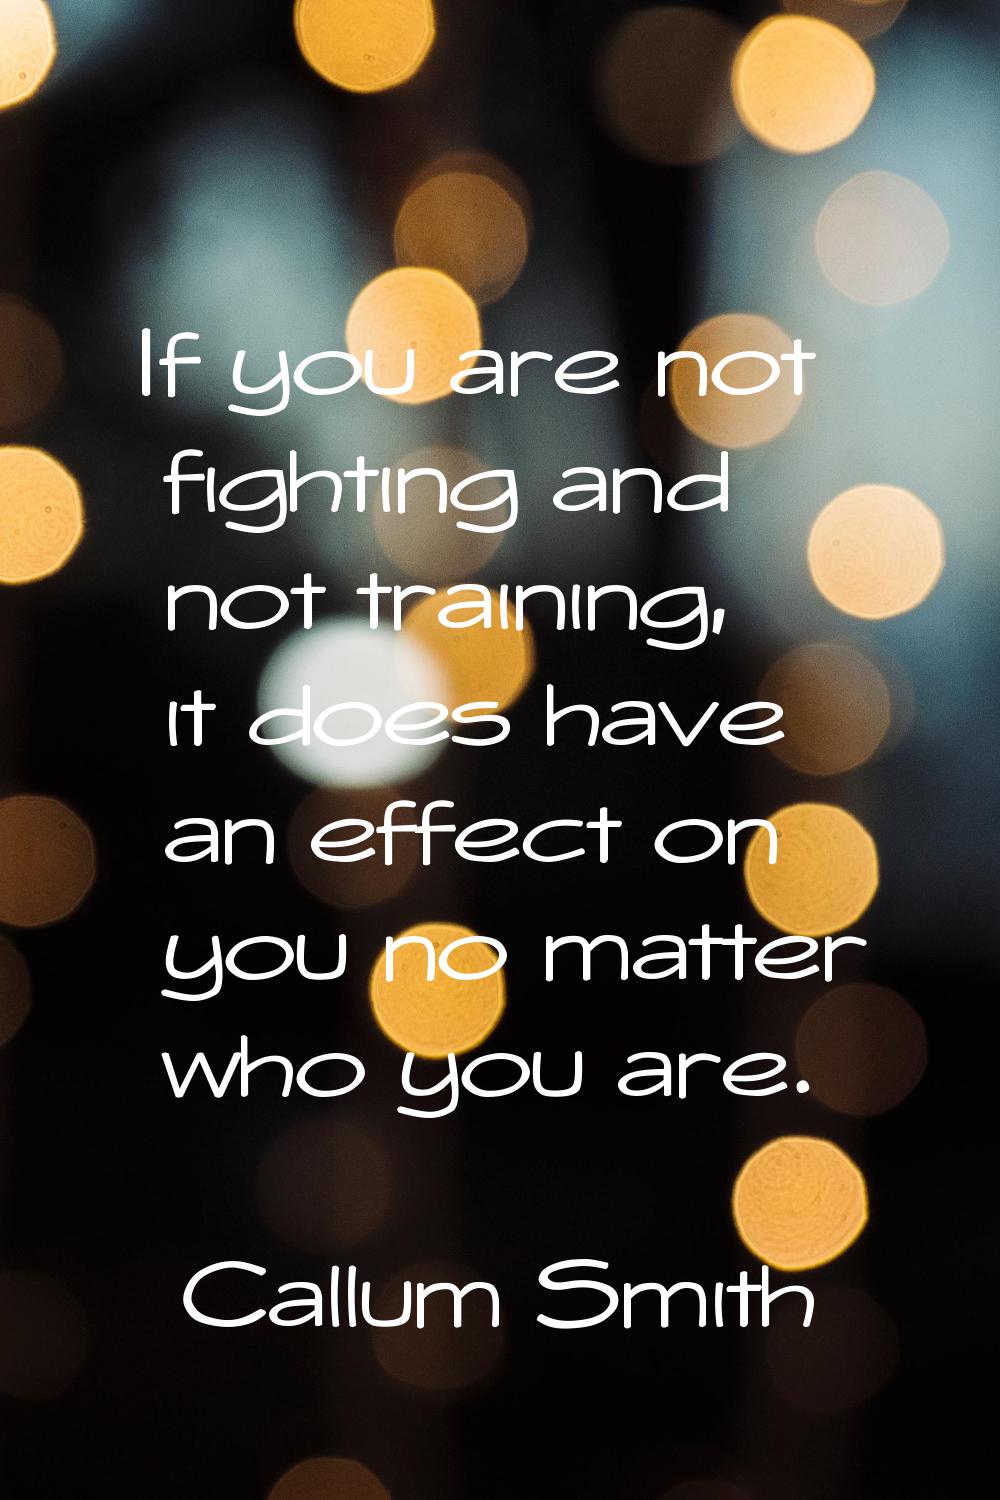 If you are not fighting and not training, it does have an effect on you no matter who you are.